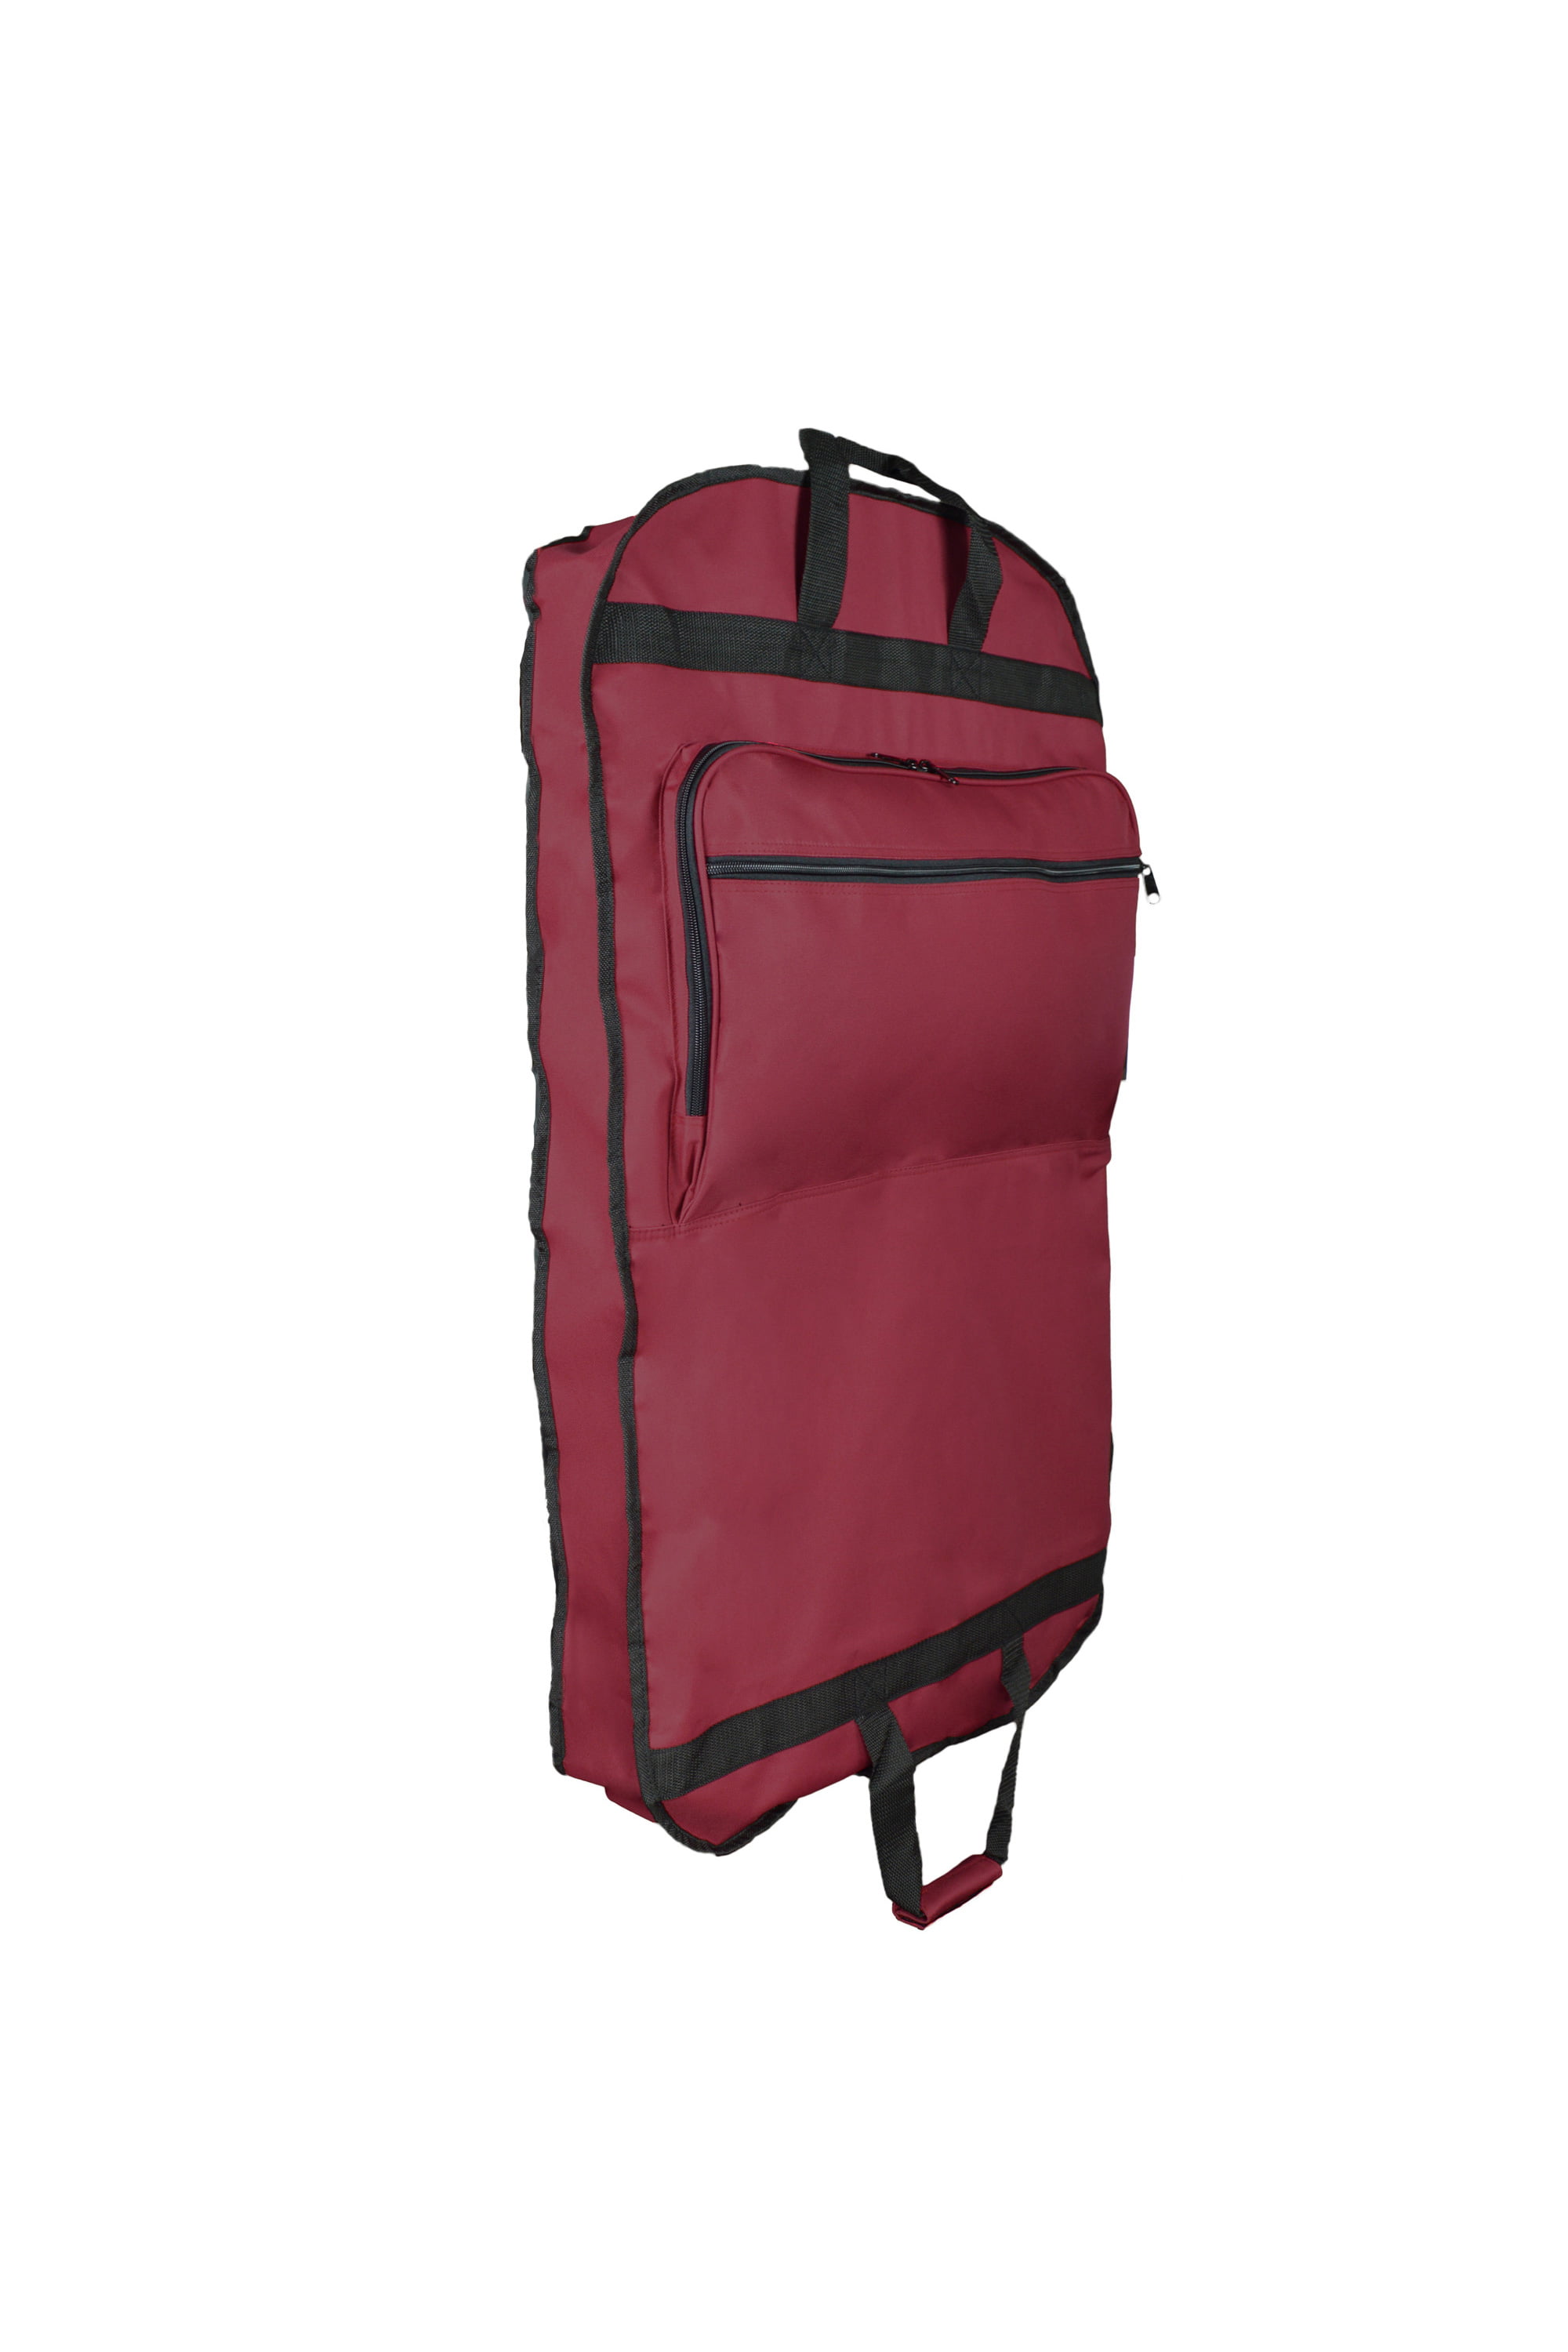 DALIX 39 Garment Bag Cover for Suits and Dresses Clothing Foldable w Pockets in Maroon 